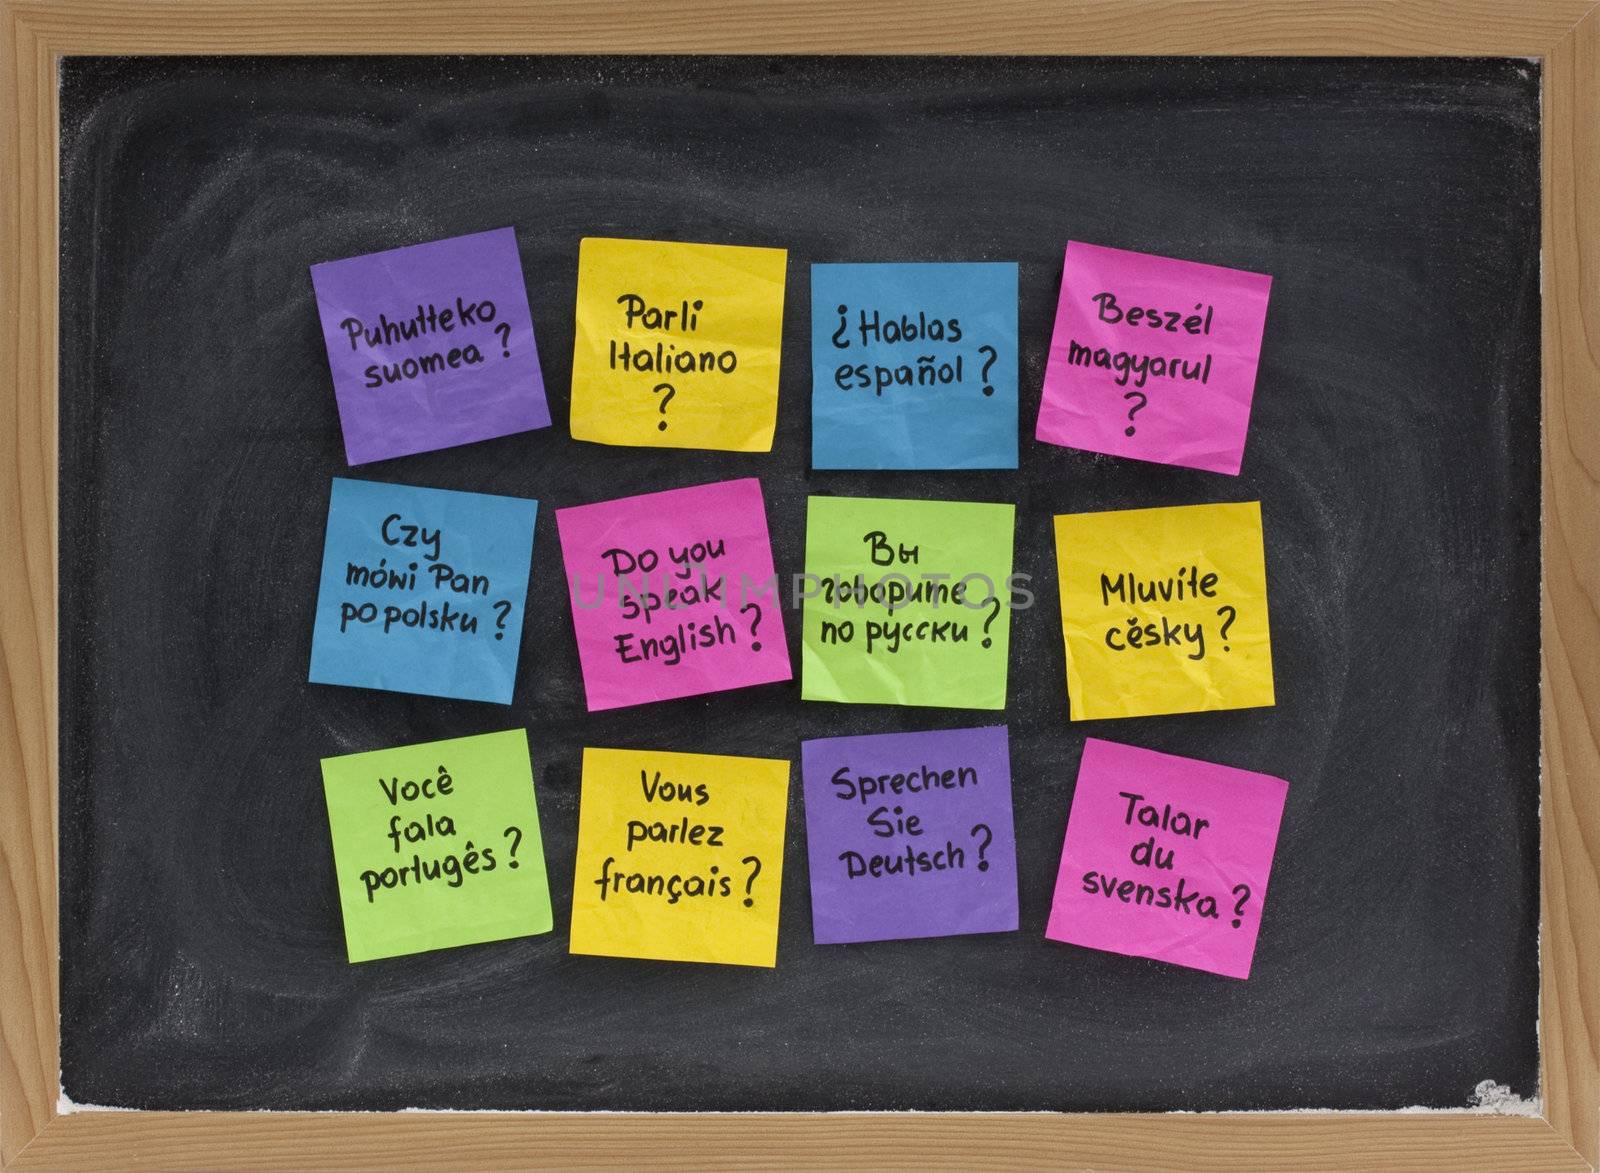 Do you speak question in dozen of languages - colorful sticky notes on blackboard with white chalk smudges